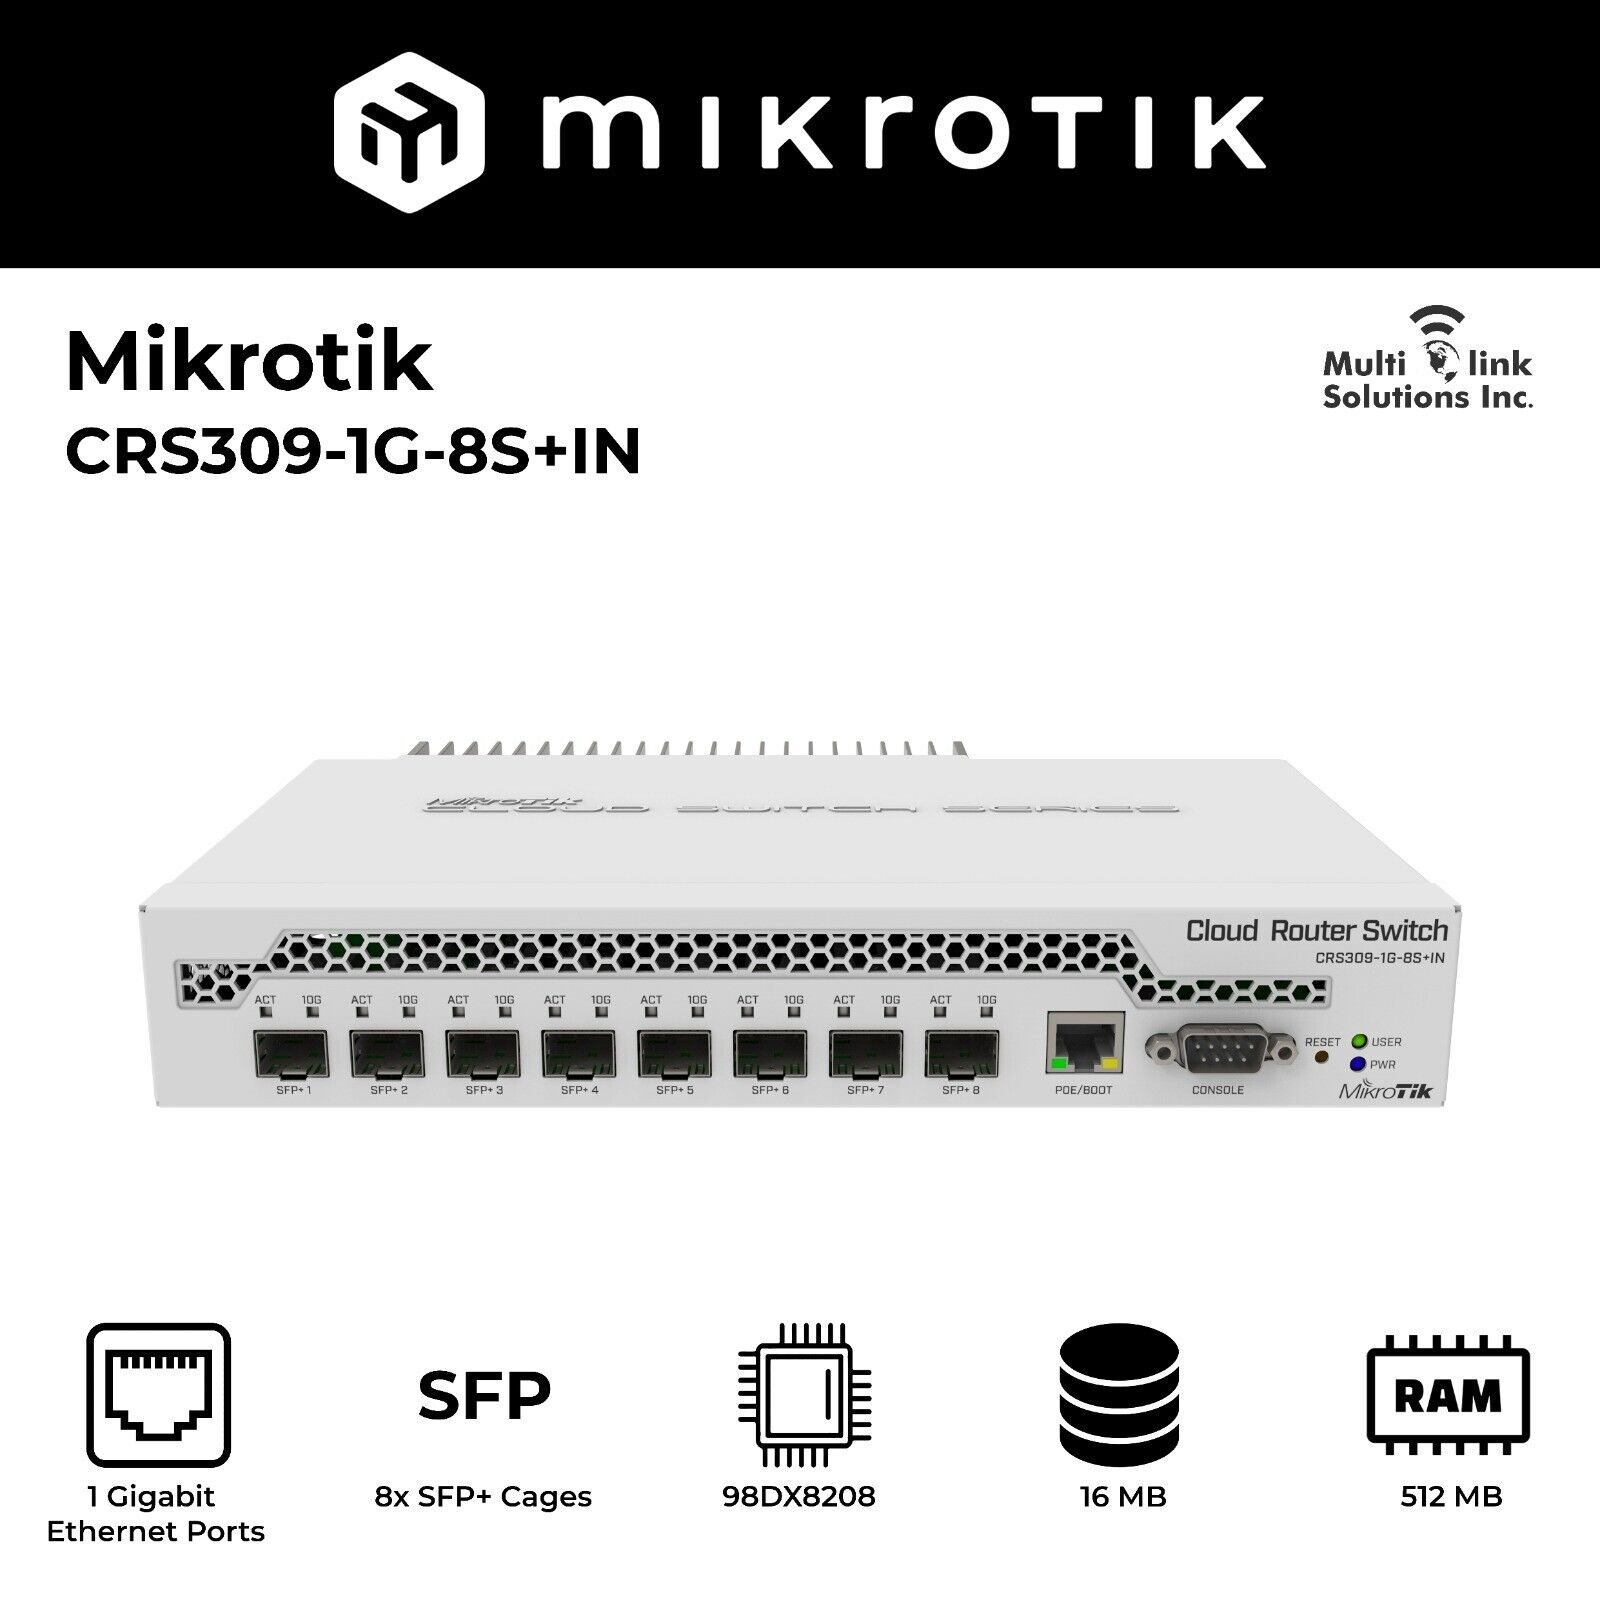 MikroTik CRS309-1G-8S+IN Switch Gigabit Ethernet Port and 8x SFP 10 Gbps Ports